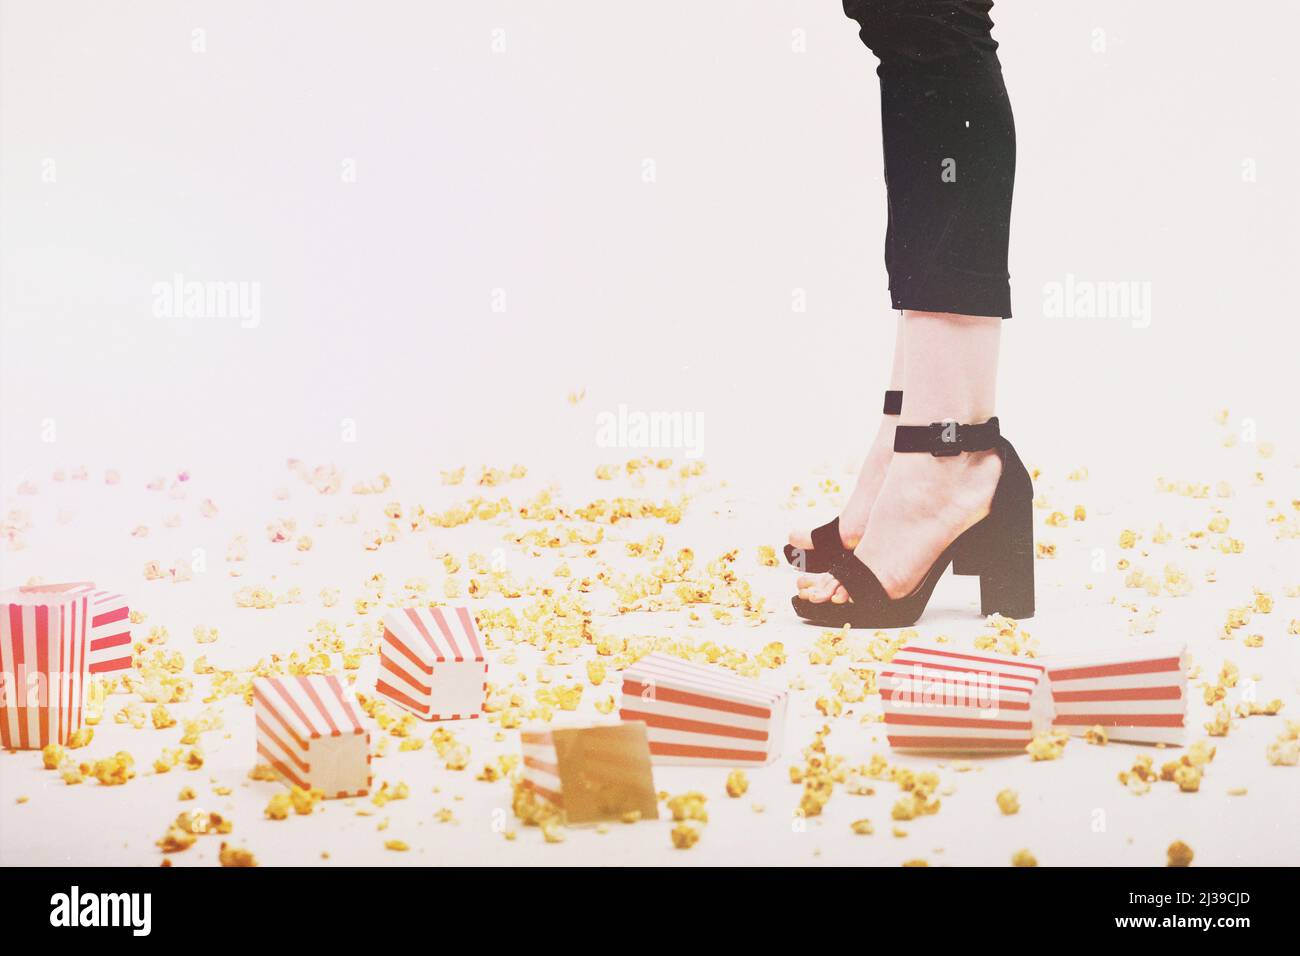 Leisure and lifestyle concept. Many popcorn and boxes tossed on floor and woman legs with black trousers and high heel shoes in white background. Vint Stock Photo